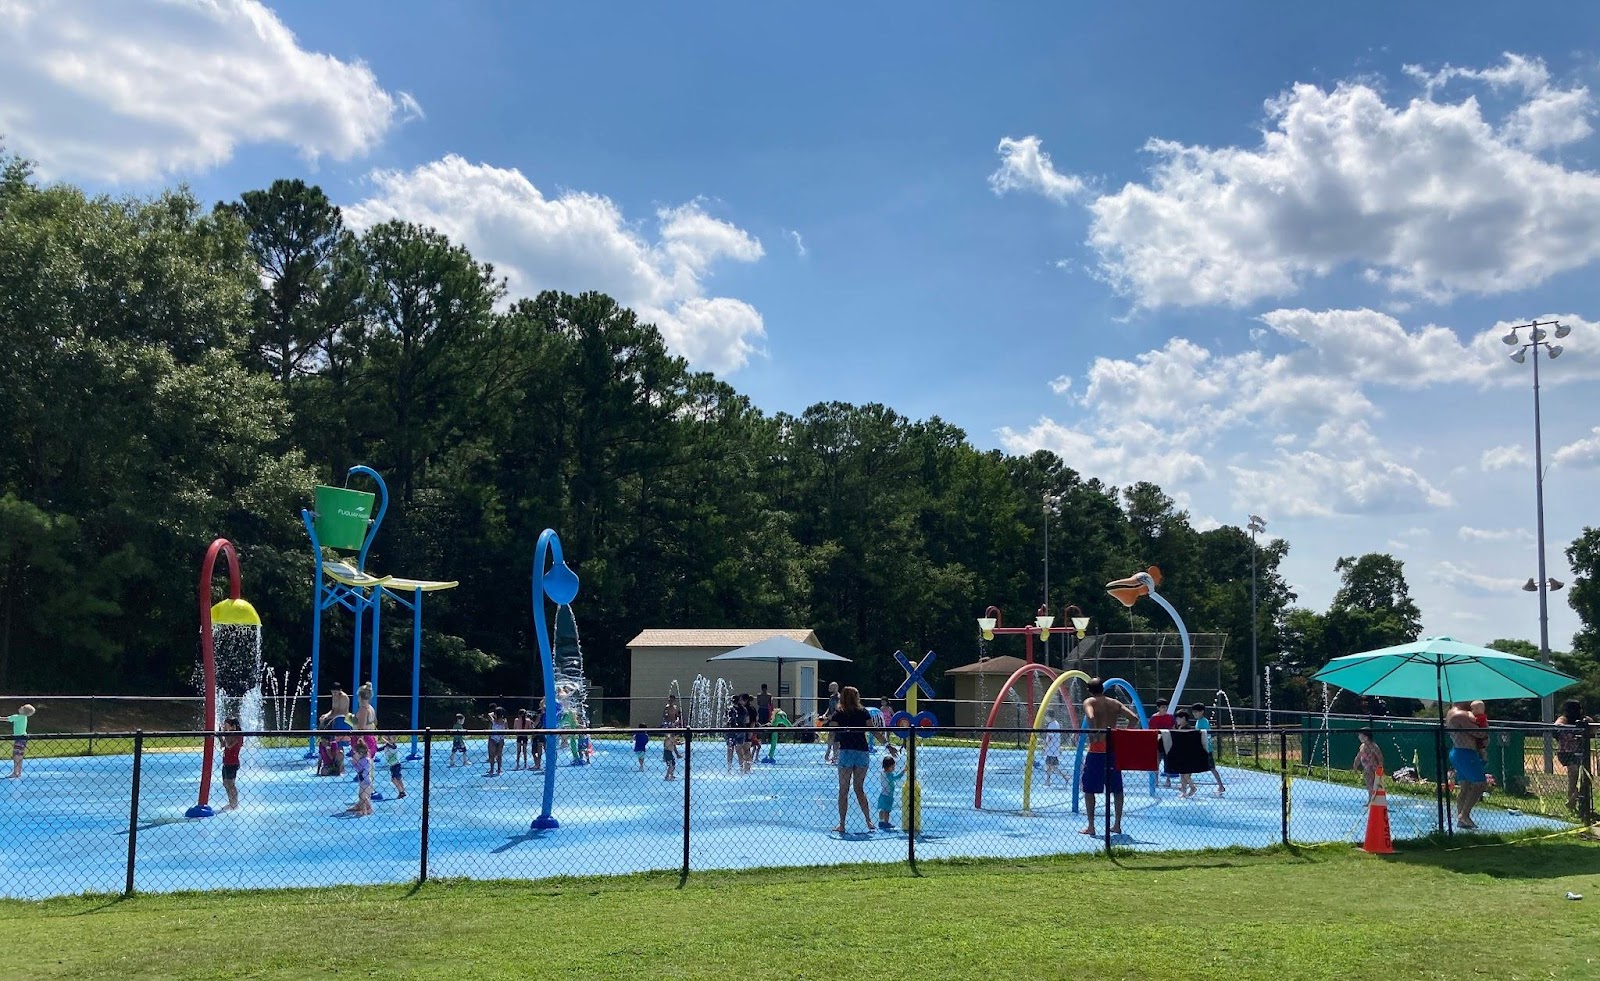 Fuquay's splash pad in South Park is a great way to cool down in the hot summer.